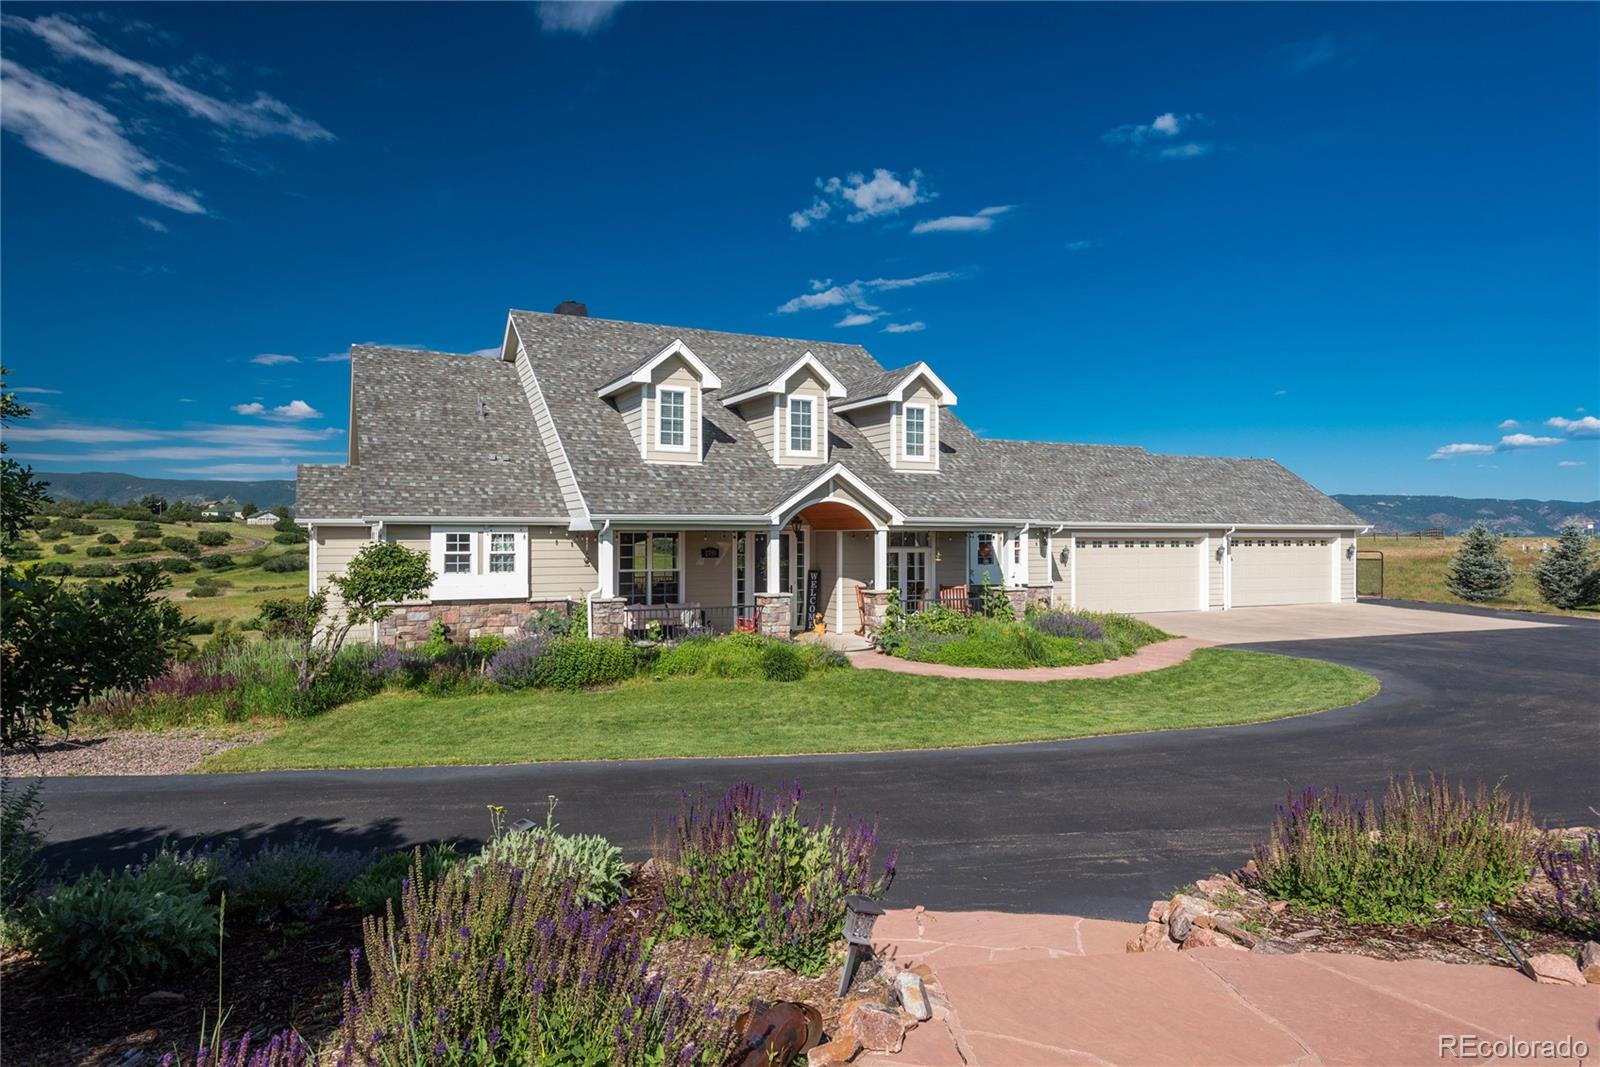 2755  ballard way, castle rock sold home. Closed on 2024-03-12 for $1,457,500.